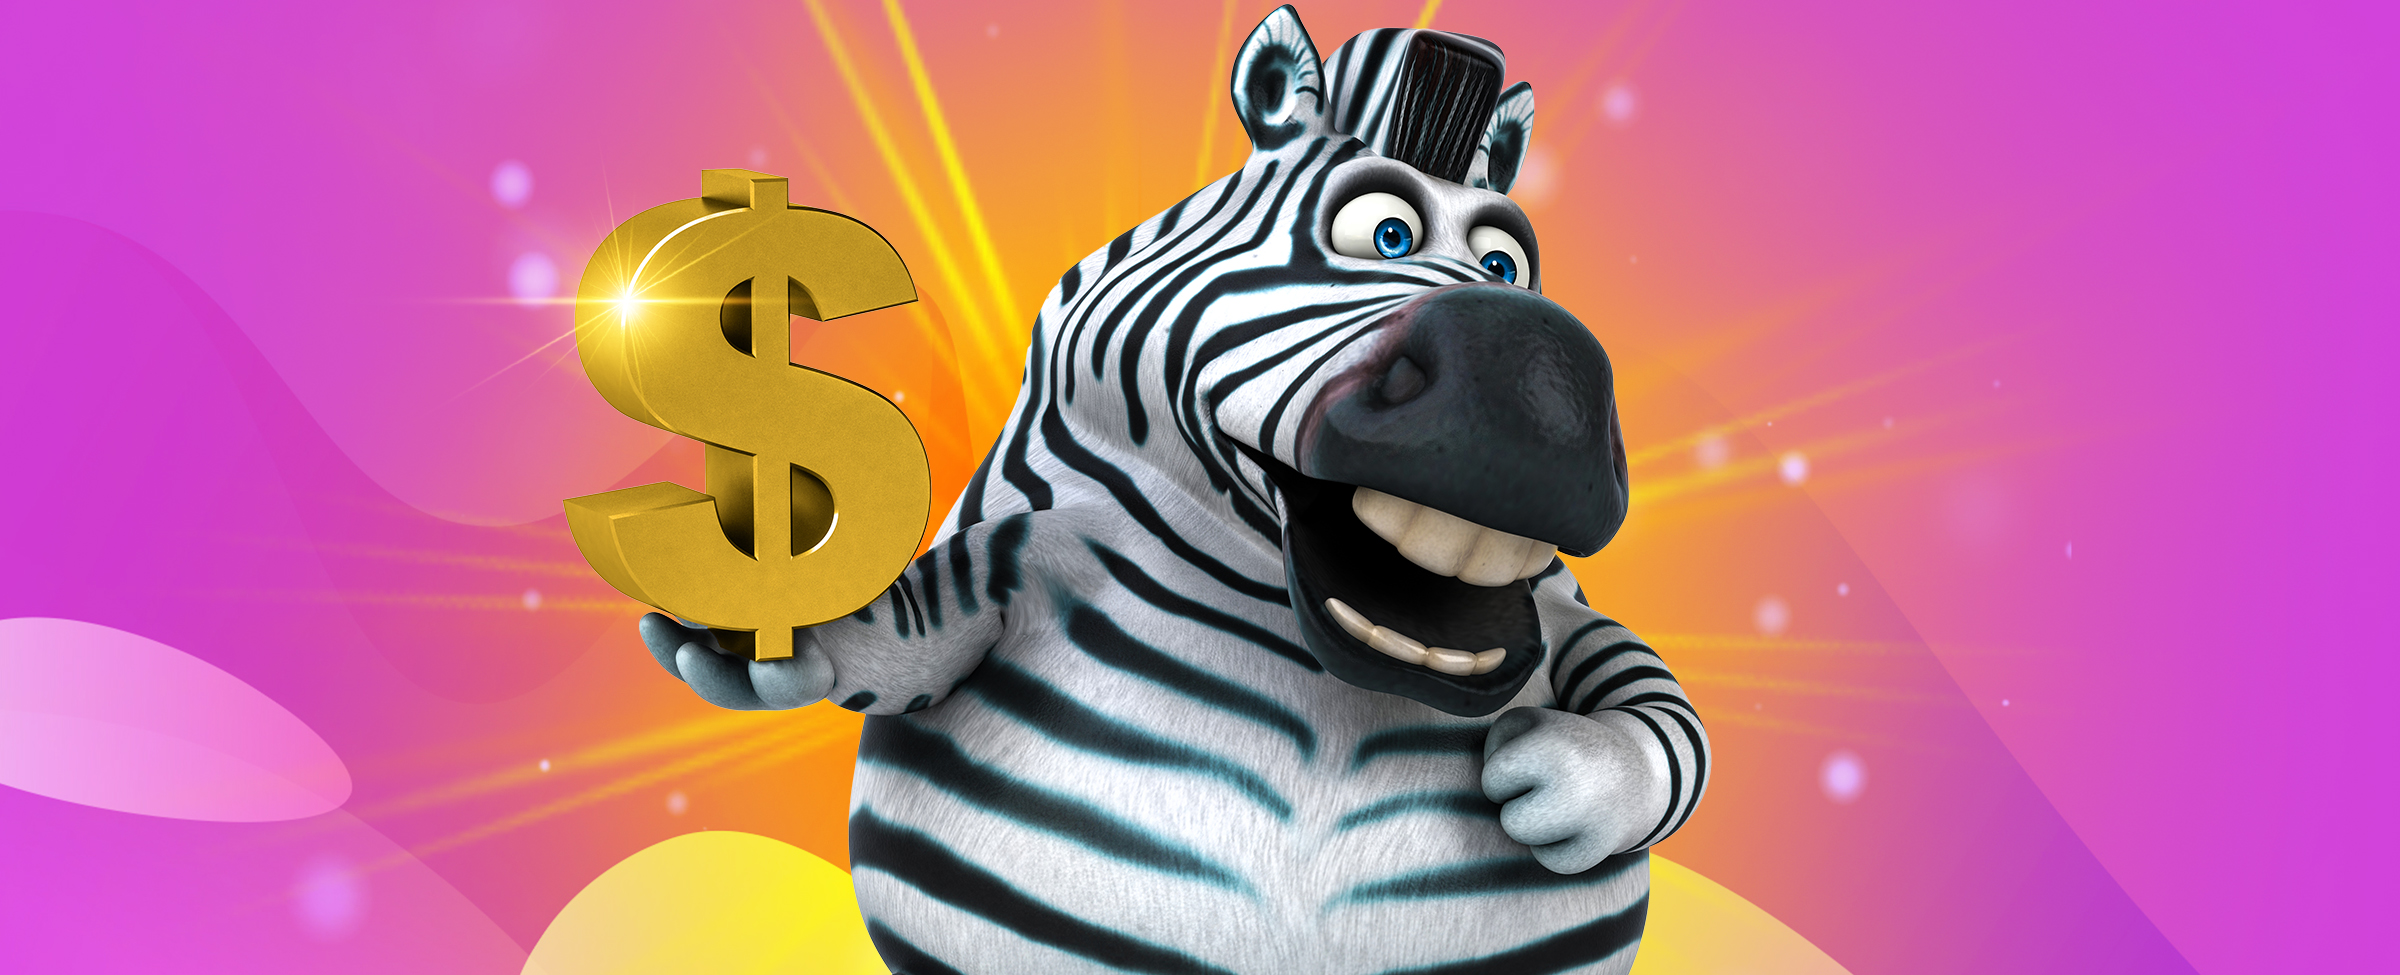 How do you play slots online real money? That’s easy! Join SlotsLV as we break it down.